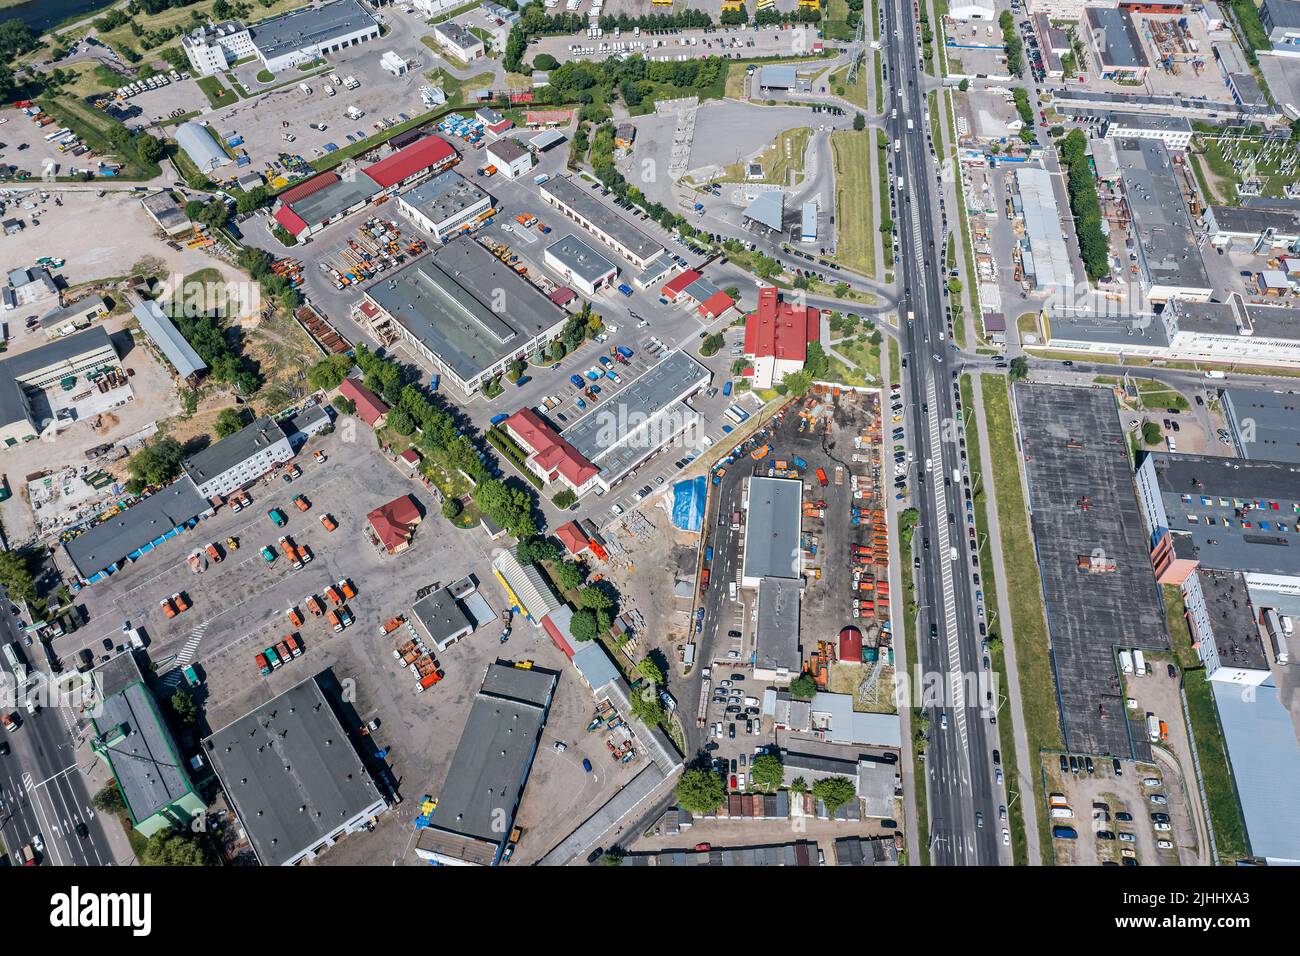 aerial view of urban industrial area. factories manufacturing, warehouses and car service stations. Stock Photo